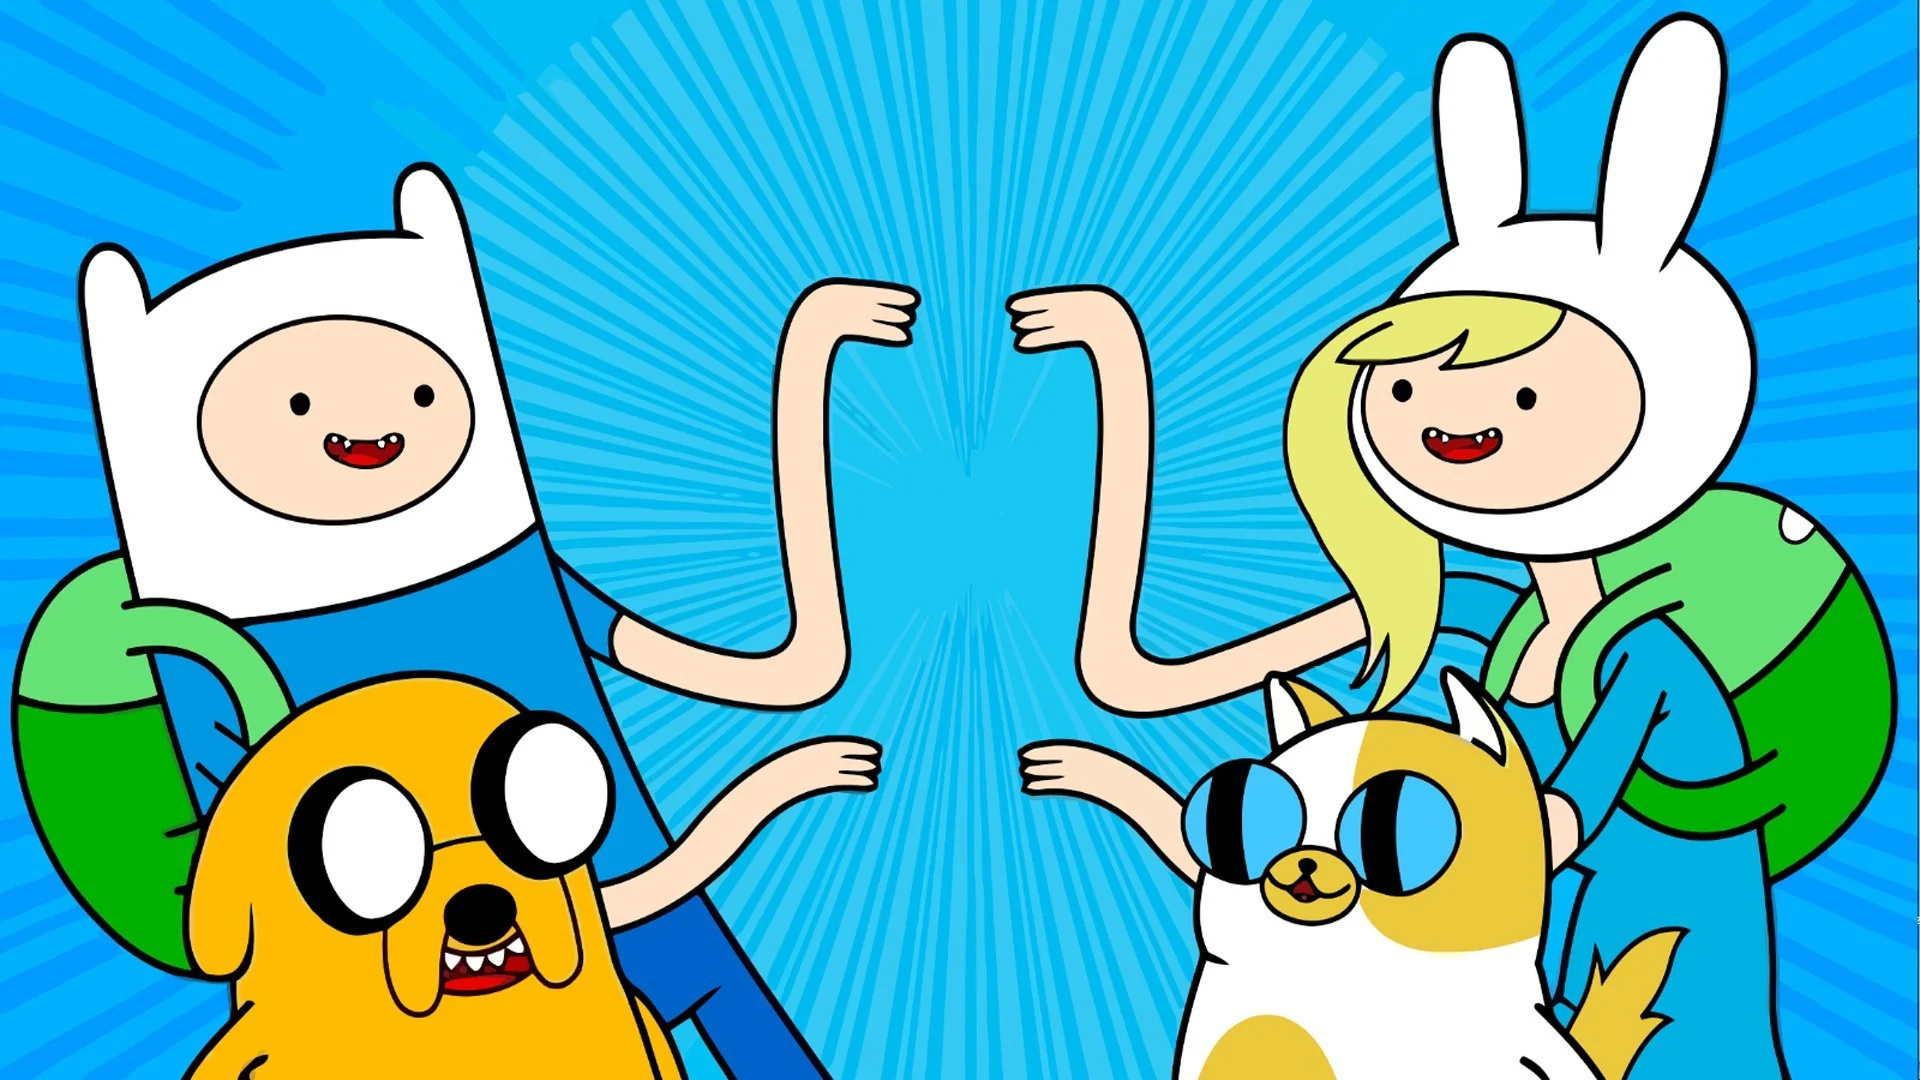 Adventure Time wallpapers, Cartoon characters, Animated series, Finn and Jake, 1920x1080 Full HD Desktop